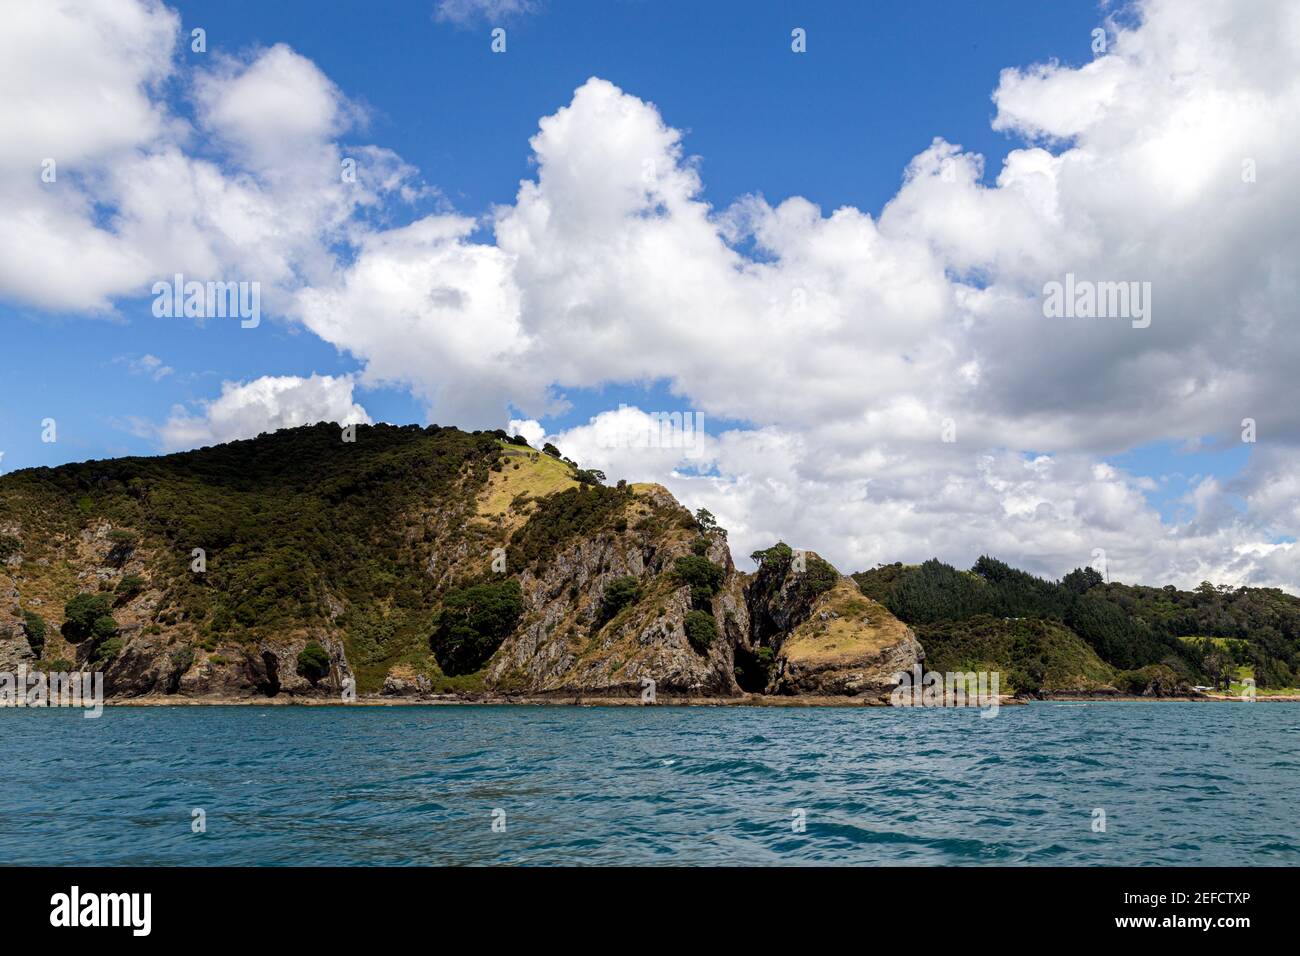 Bay of Islands in New Zealand Stock Photo